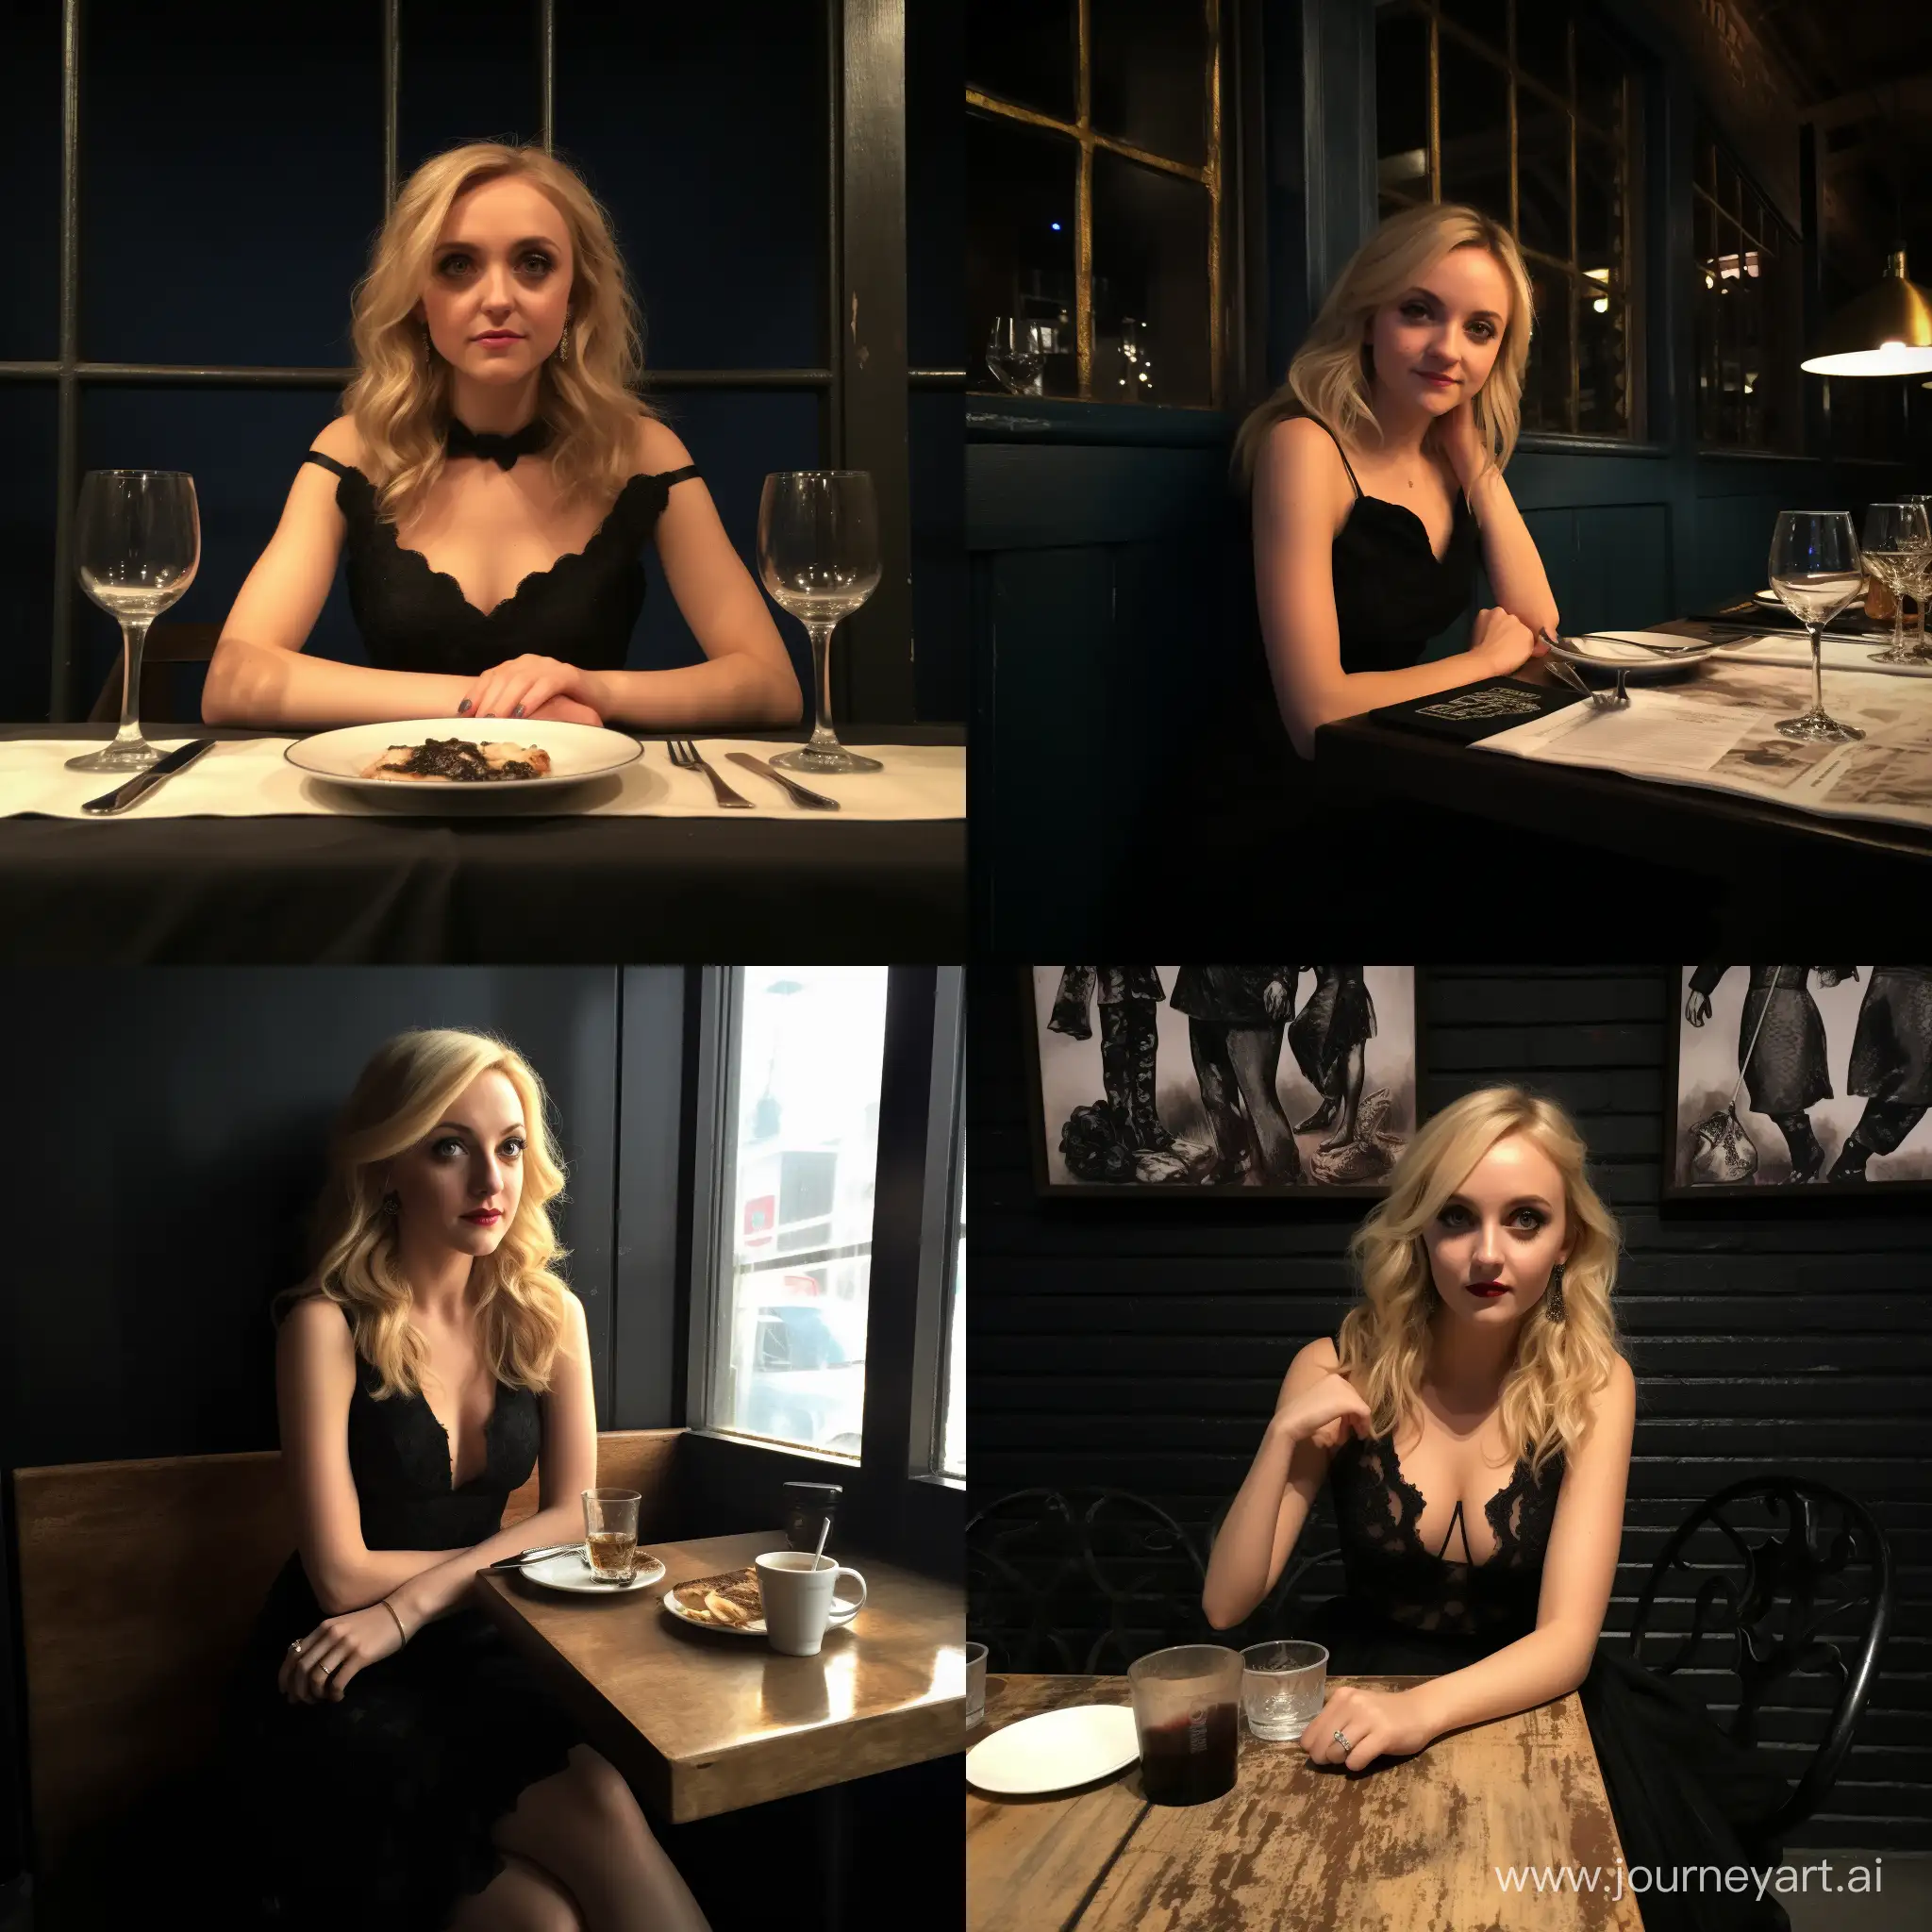 Evanna lynch sitting at a table in a black dress